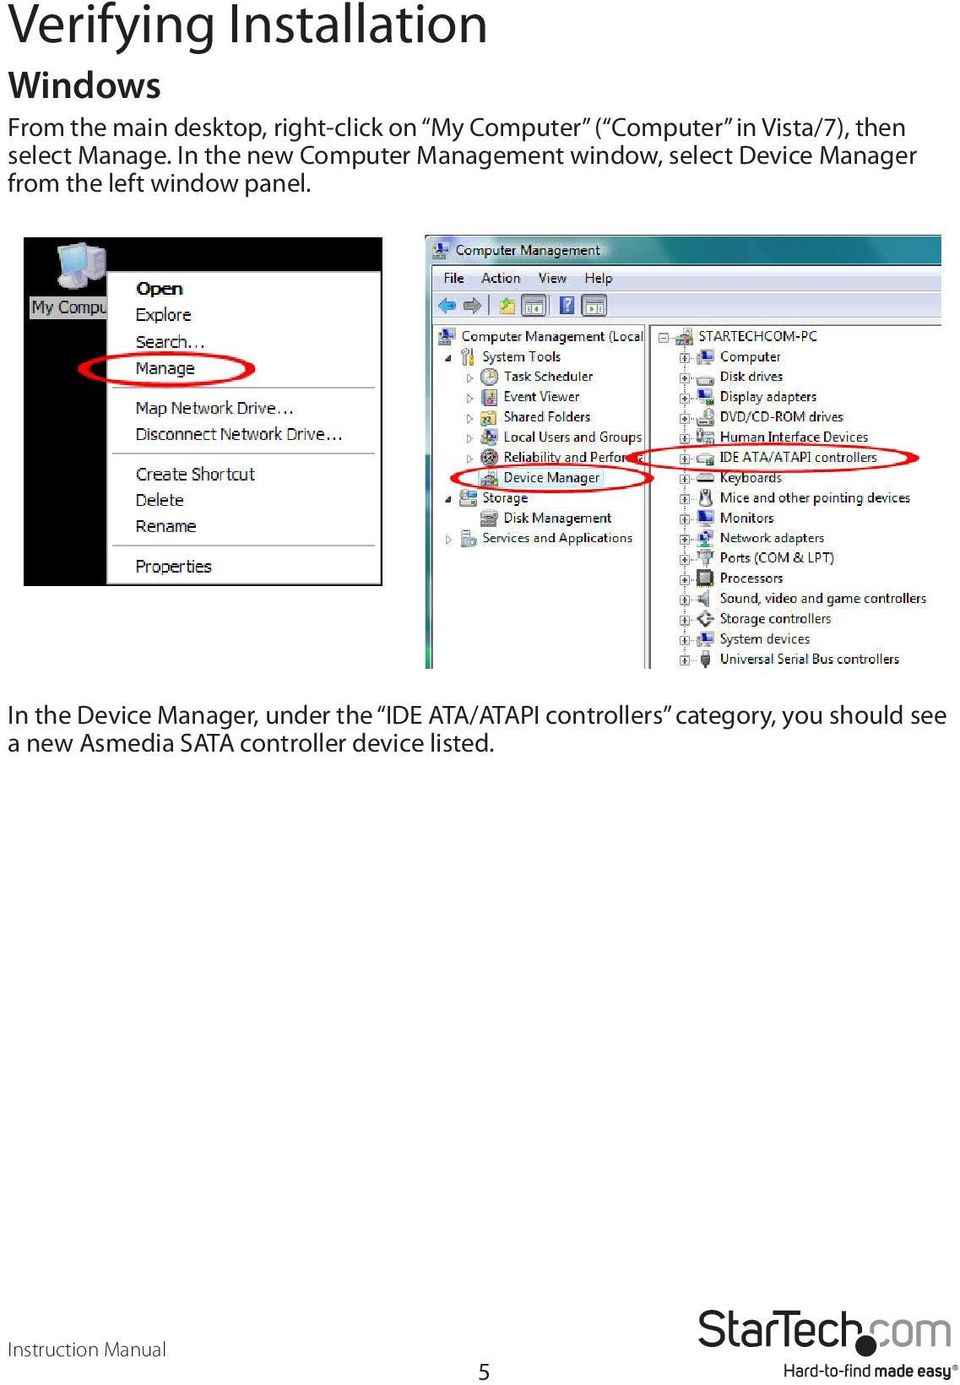 In the new Computer Management window, select Device Manager from the left window